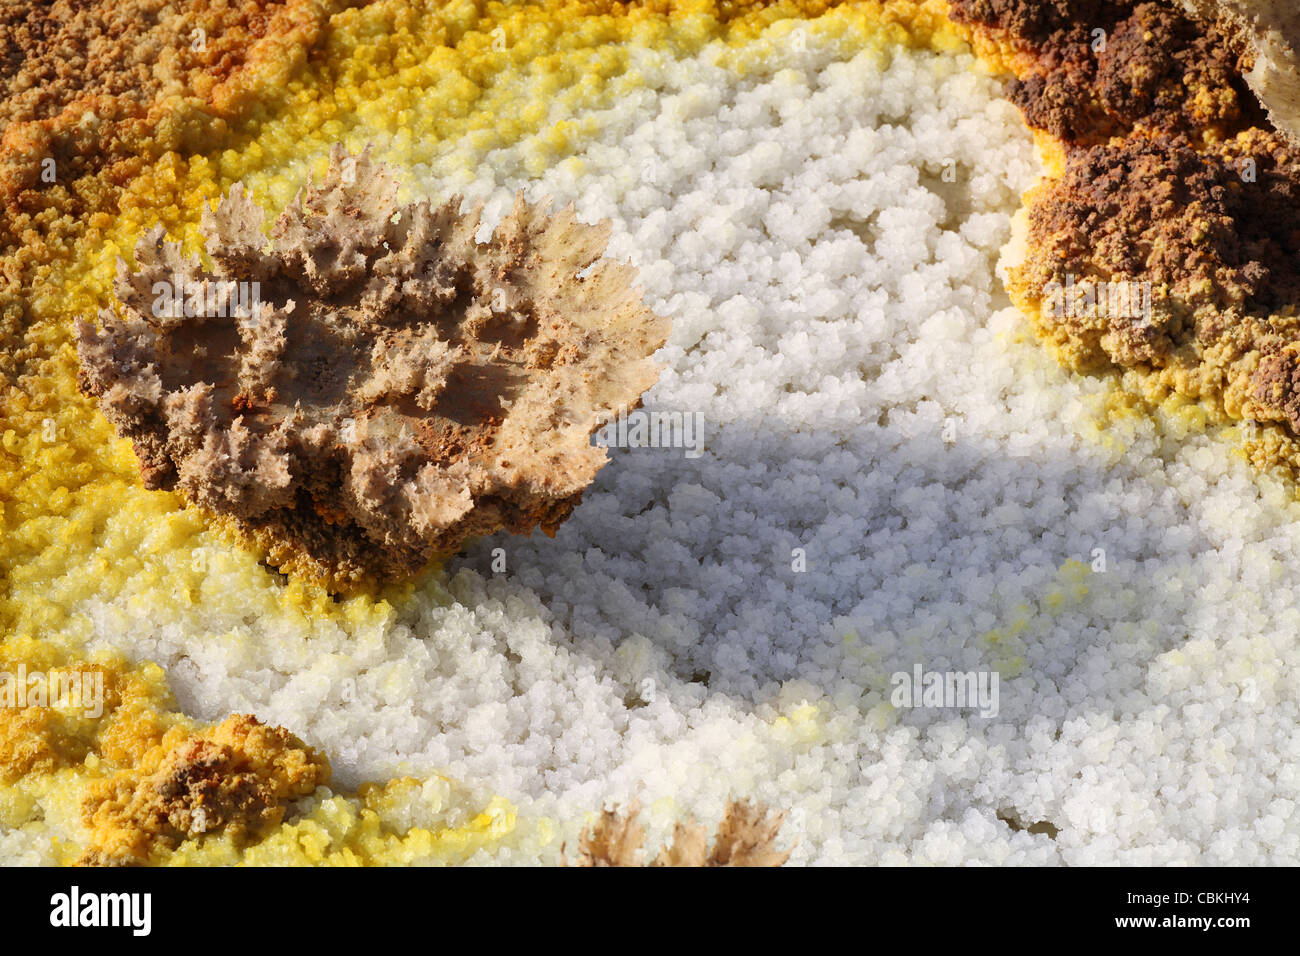 Dallol geothermal area, deposits of potassium salts formed by evaporation of water from brine hot springs, Ethiopia. Stock Photo